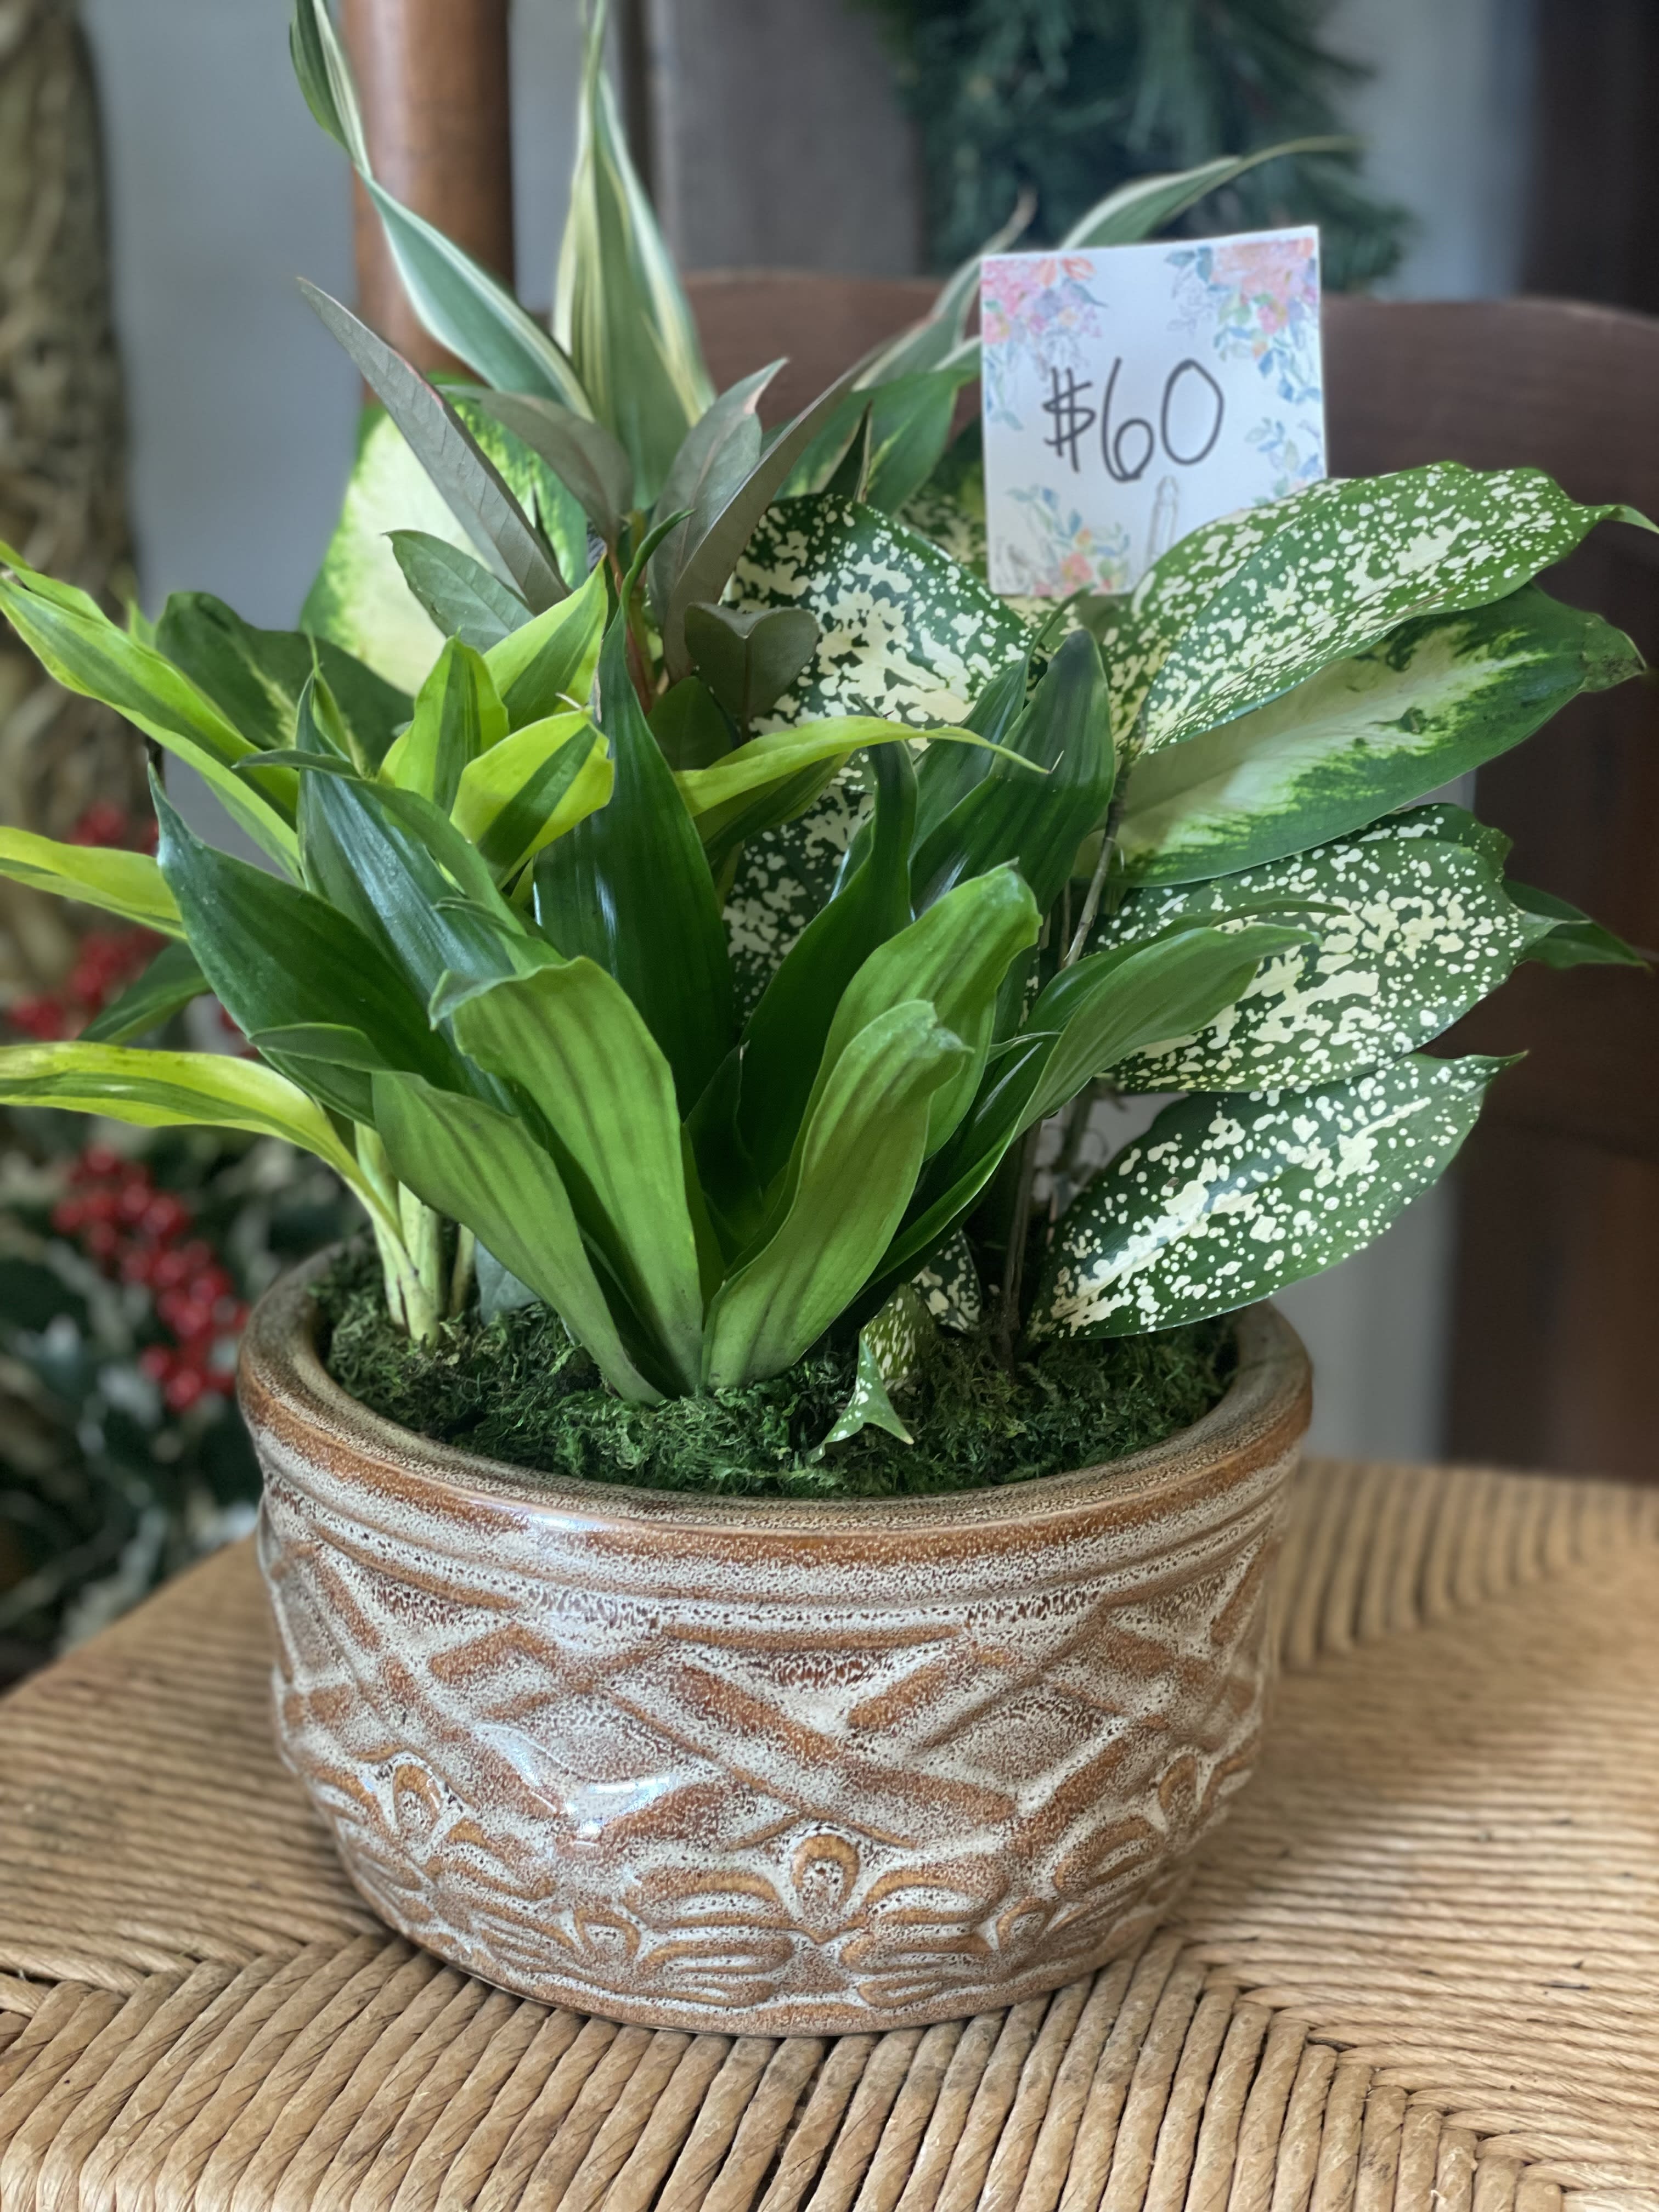 12&quot; Dish Garden - Dish gardens come with a variety of plants in a beautiful ceramic, wood or metal container.  They come planted and ready to display, with a coordinating bow. These beautiful arrangements give you the ability to separate and share with others or enjoy as a full arrangement until they outgrow their home.  